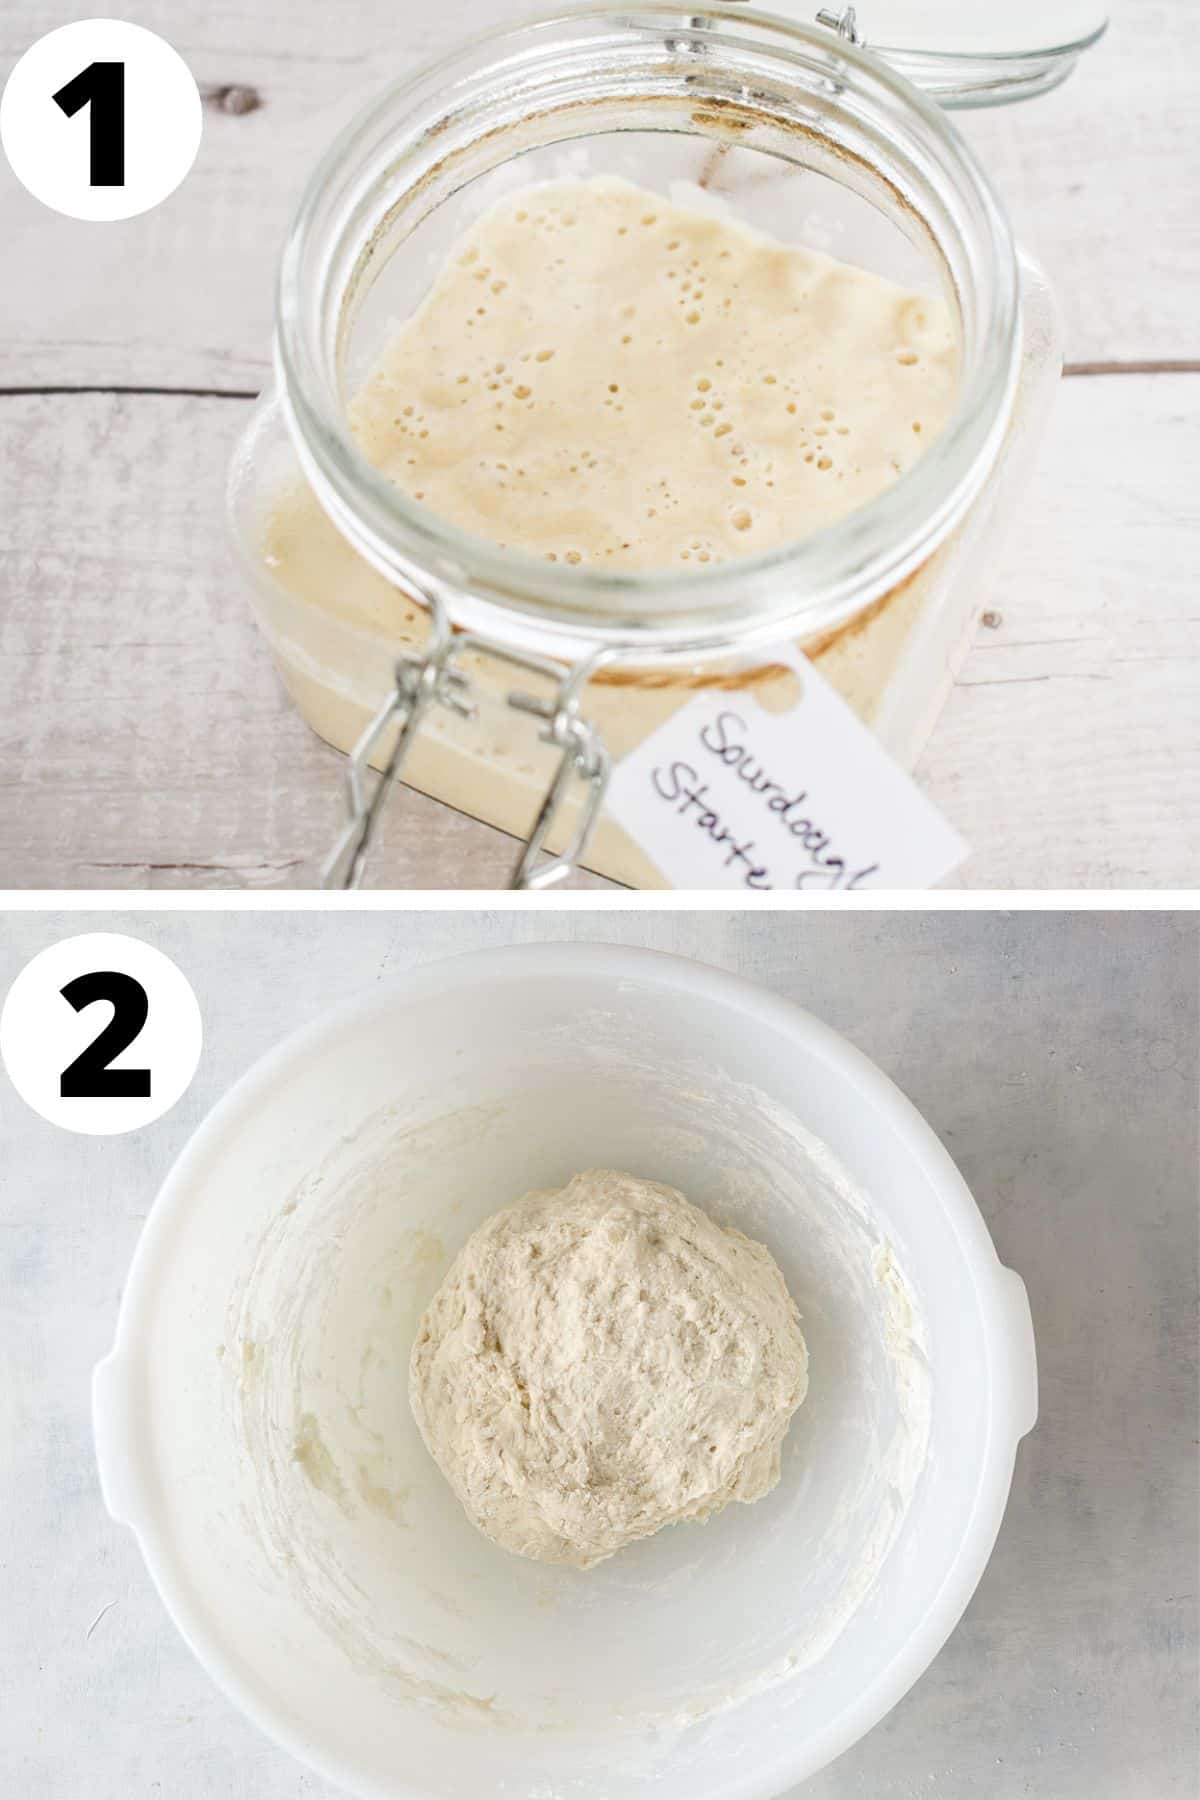 two images showing sourdough starter and dough in bowl. 